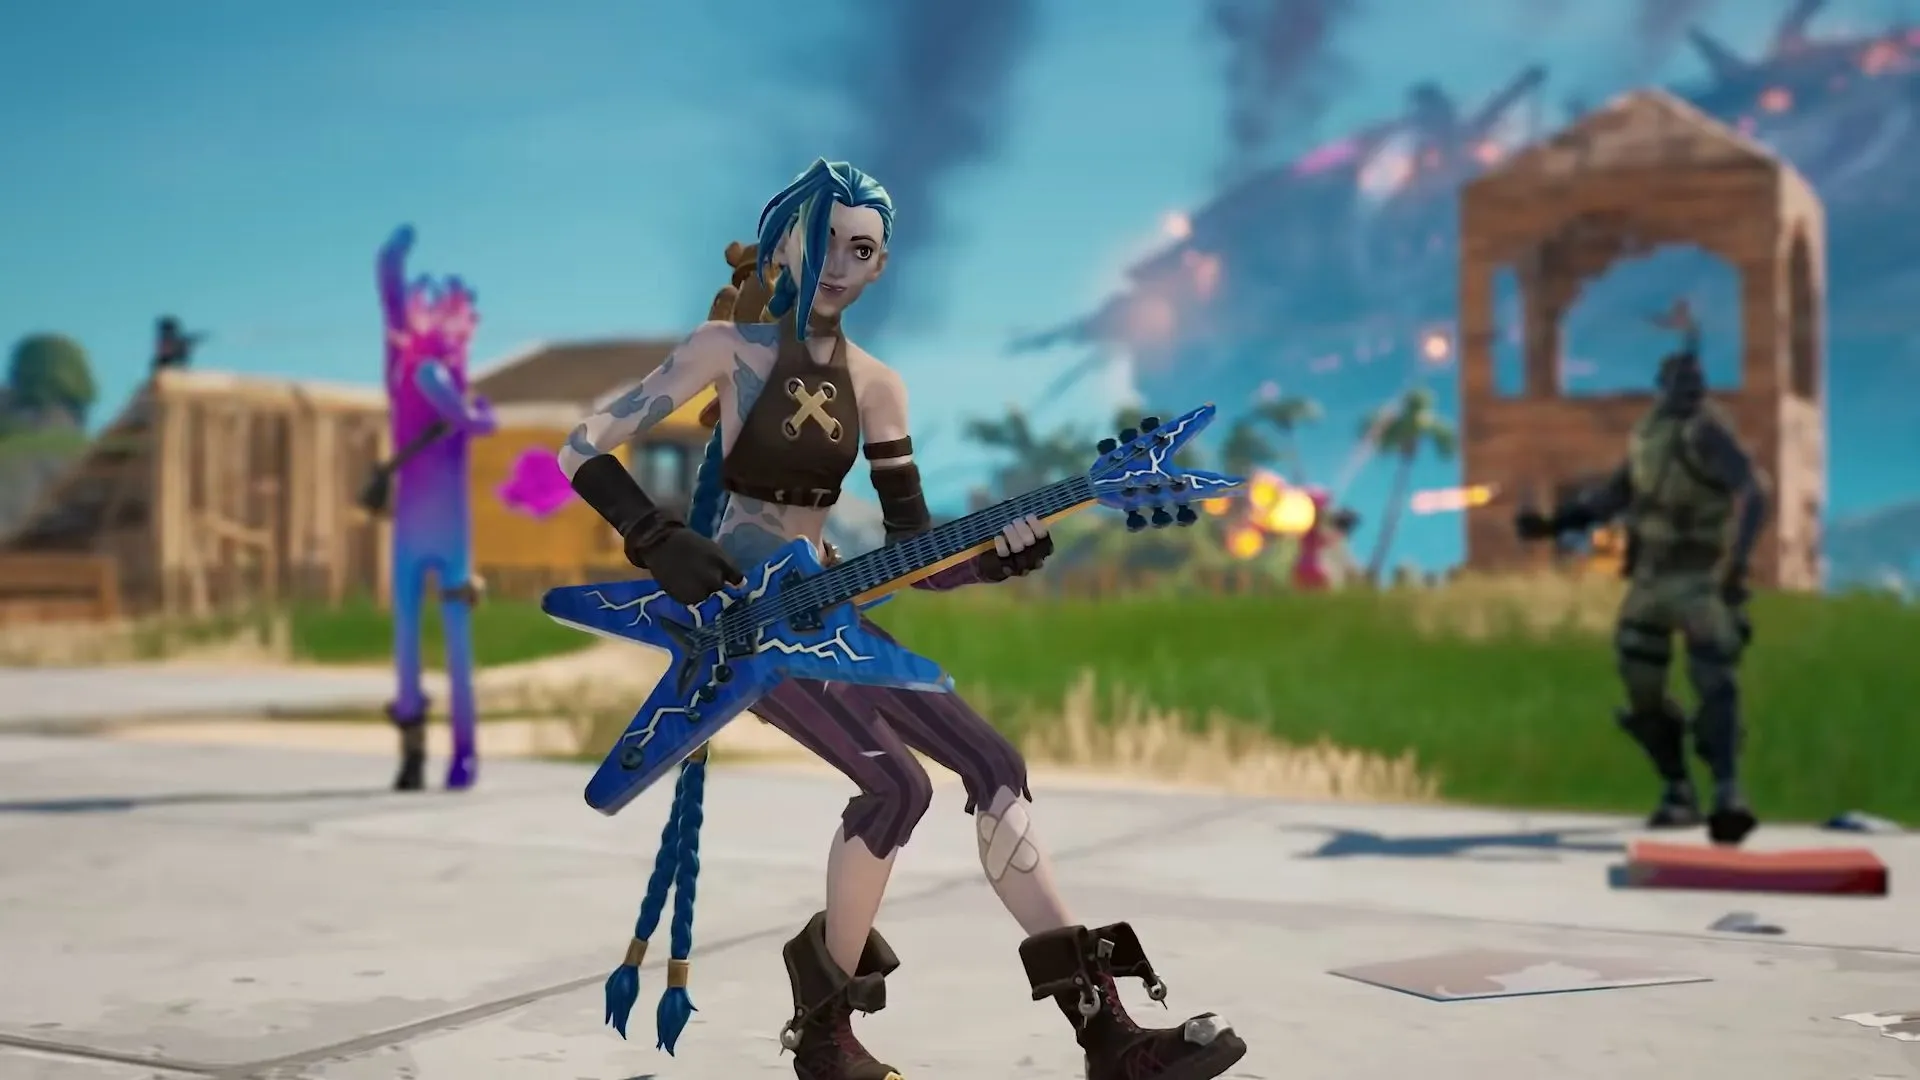 Fortnite meets League of Legends with Jinx